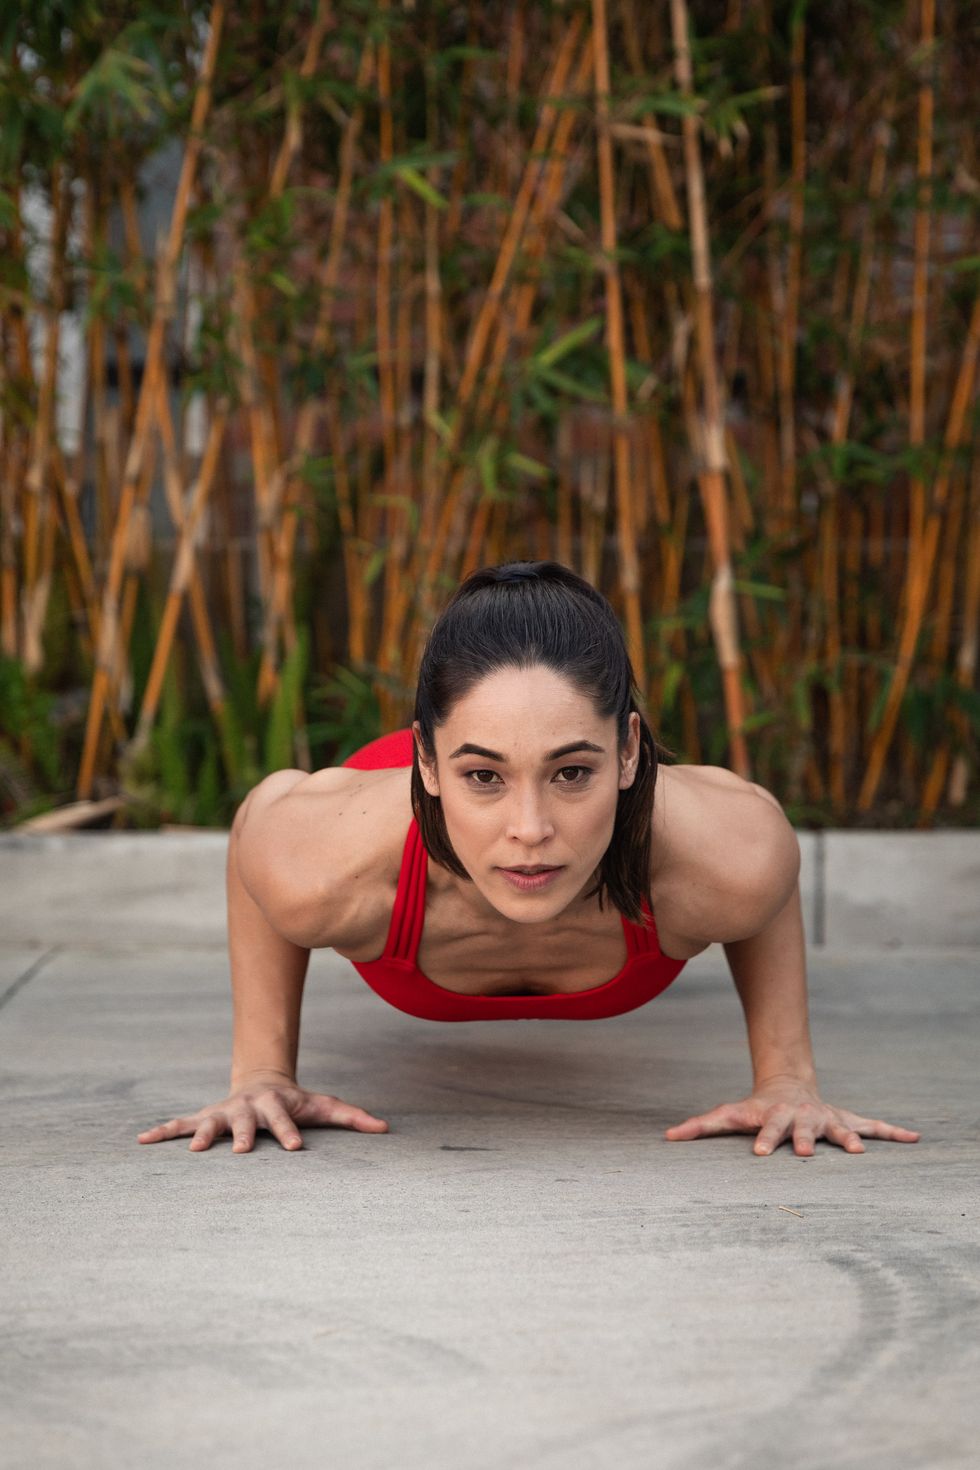 4 Pushup Diversifications to Pump Up Your Workout